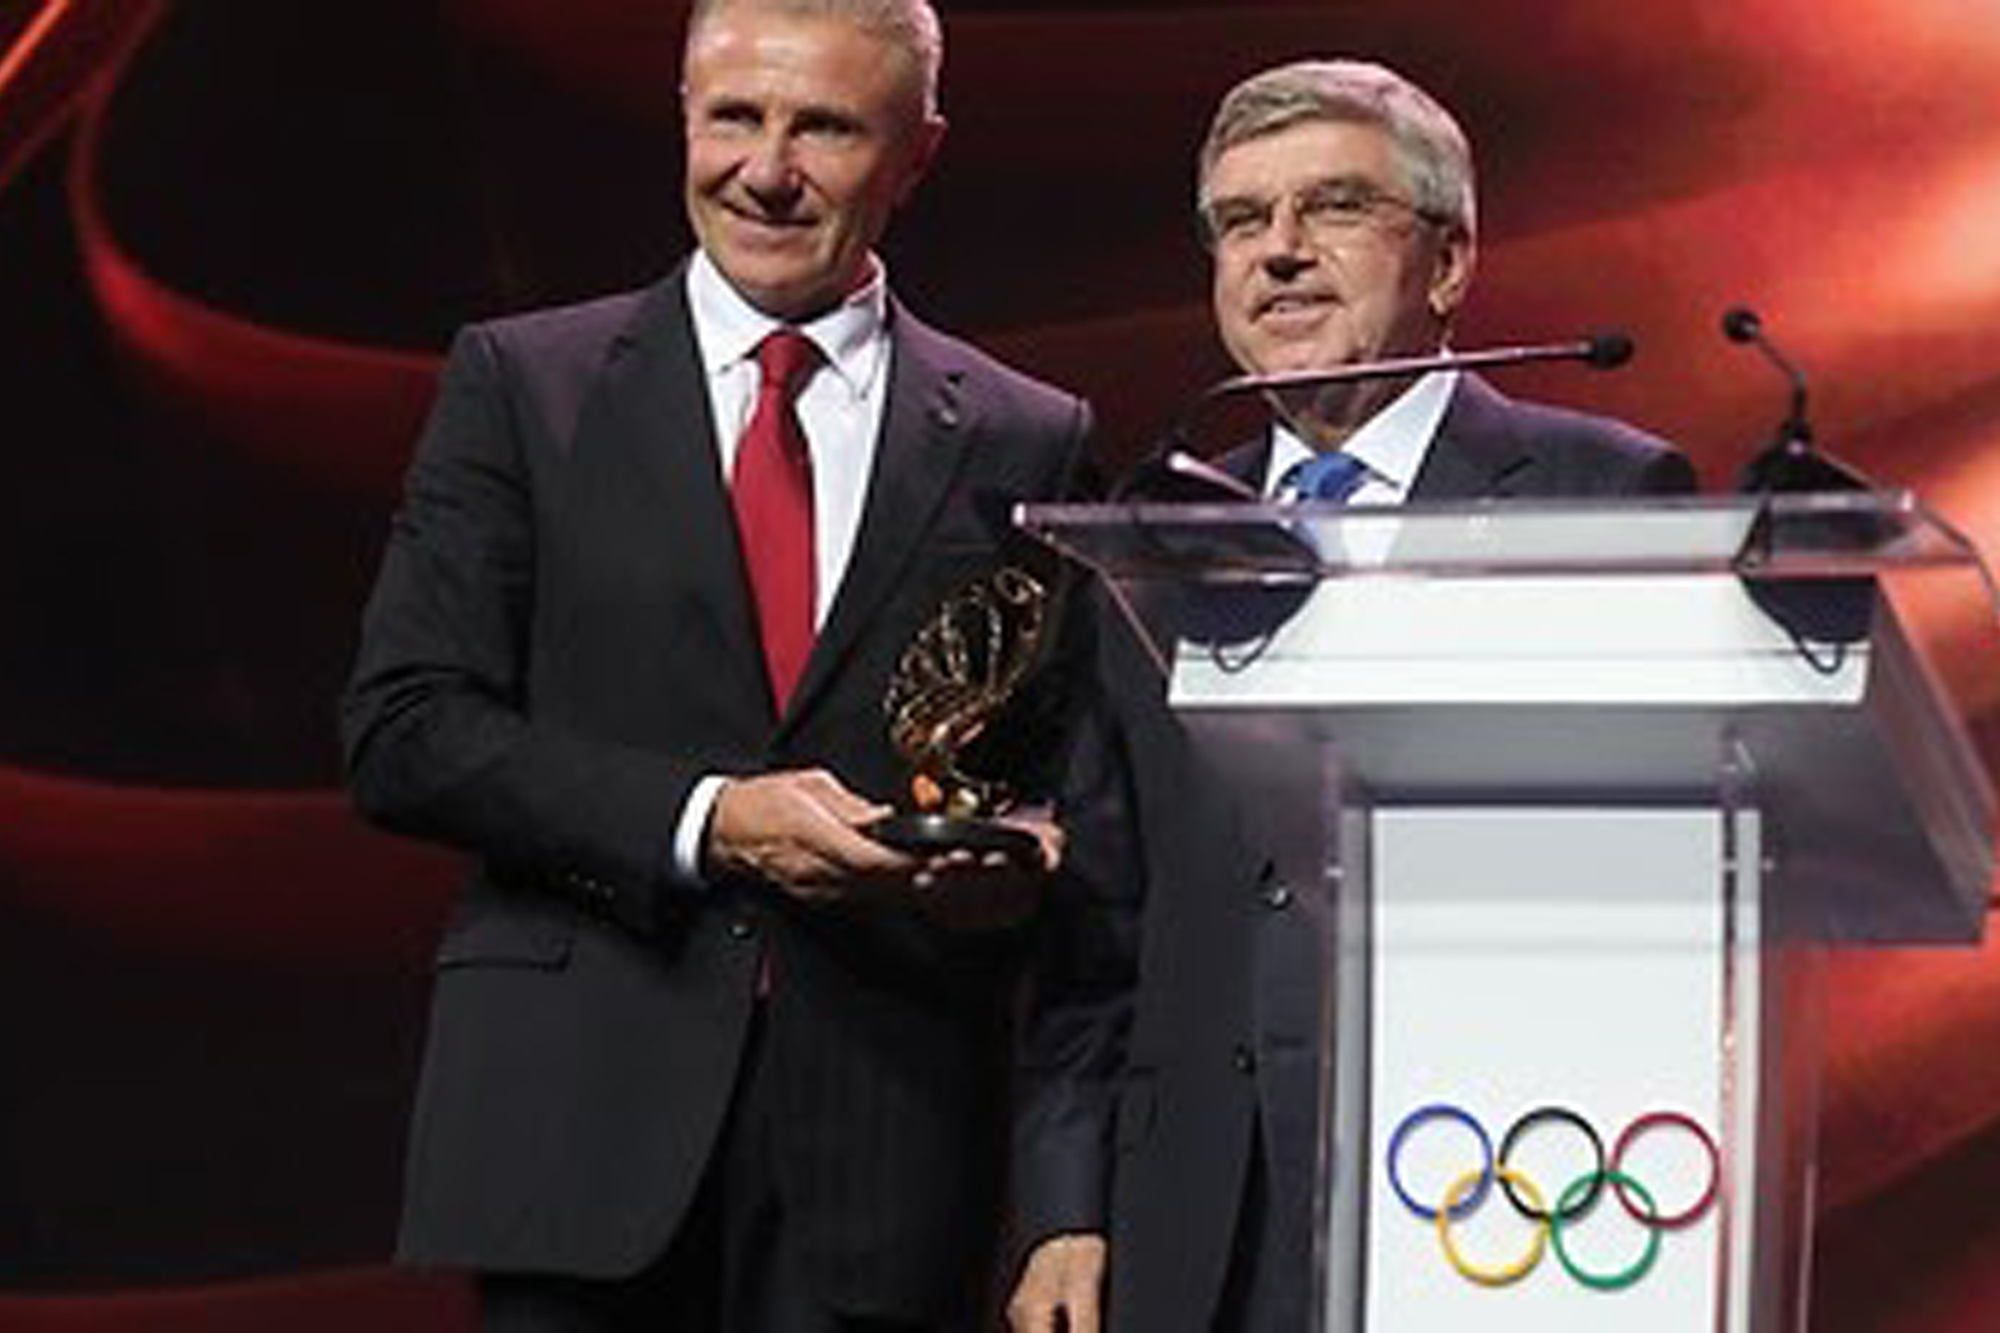 MMA Ukraine join the party to welcome IOC President Thomas Bach to Kiev